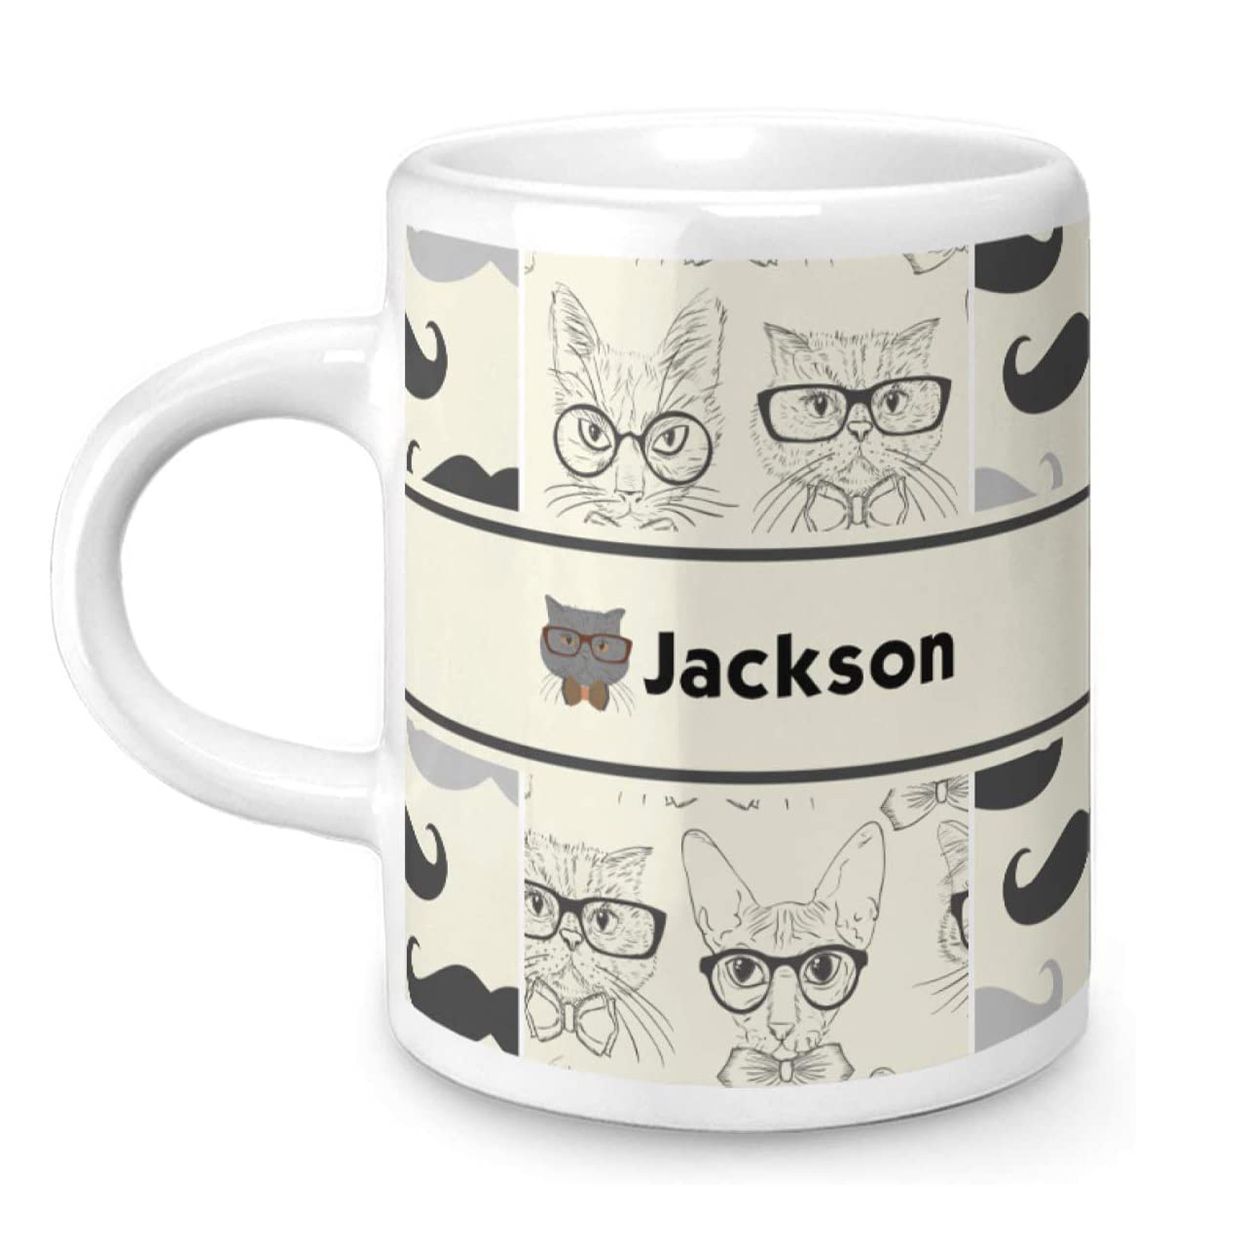 Product photo of a Personalized Hipster Cat Espresso Cup on a white background